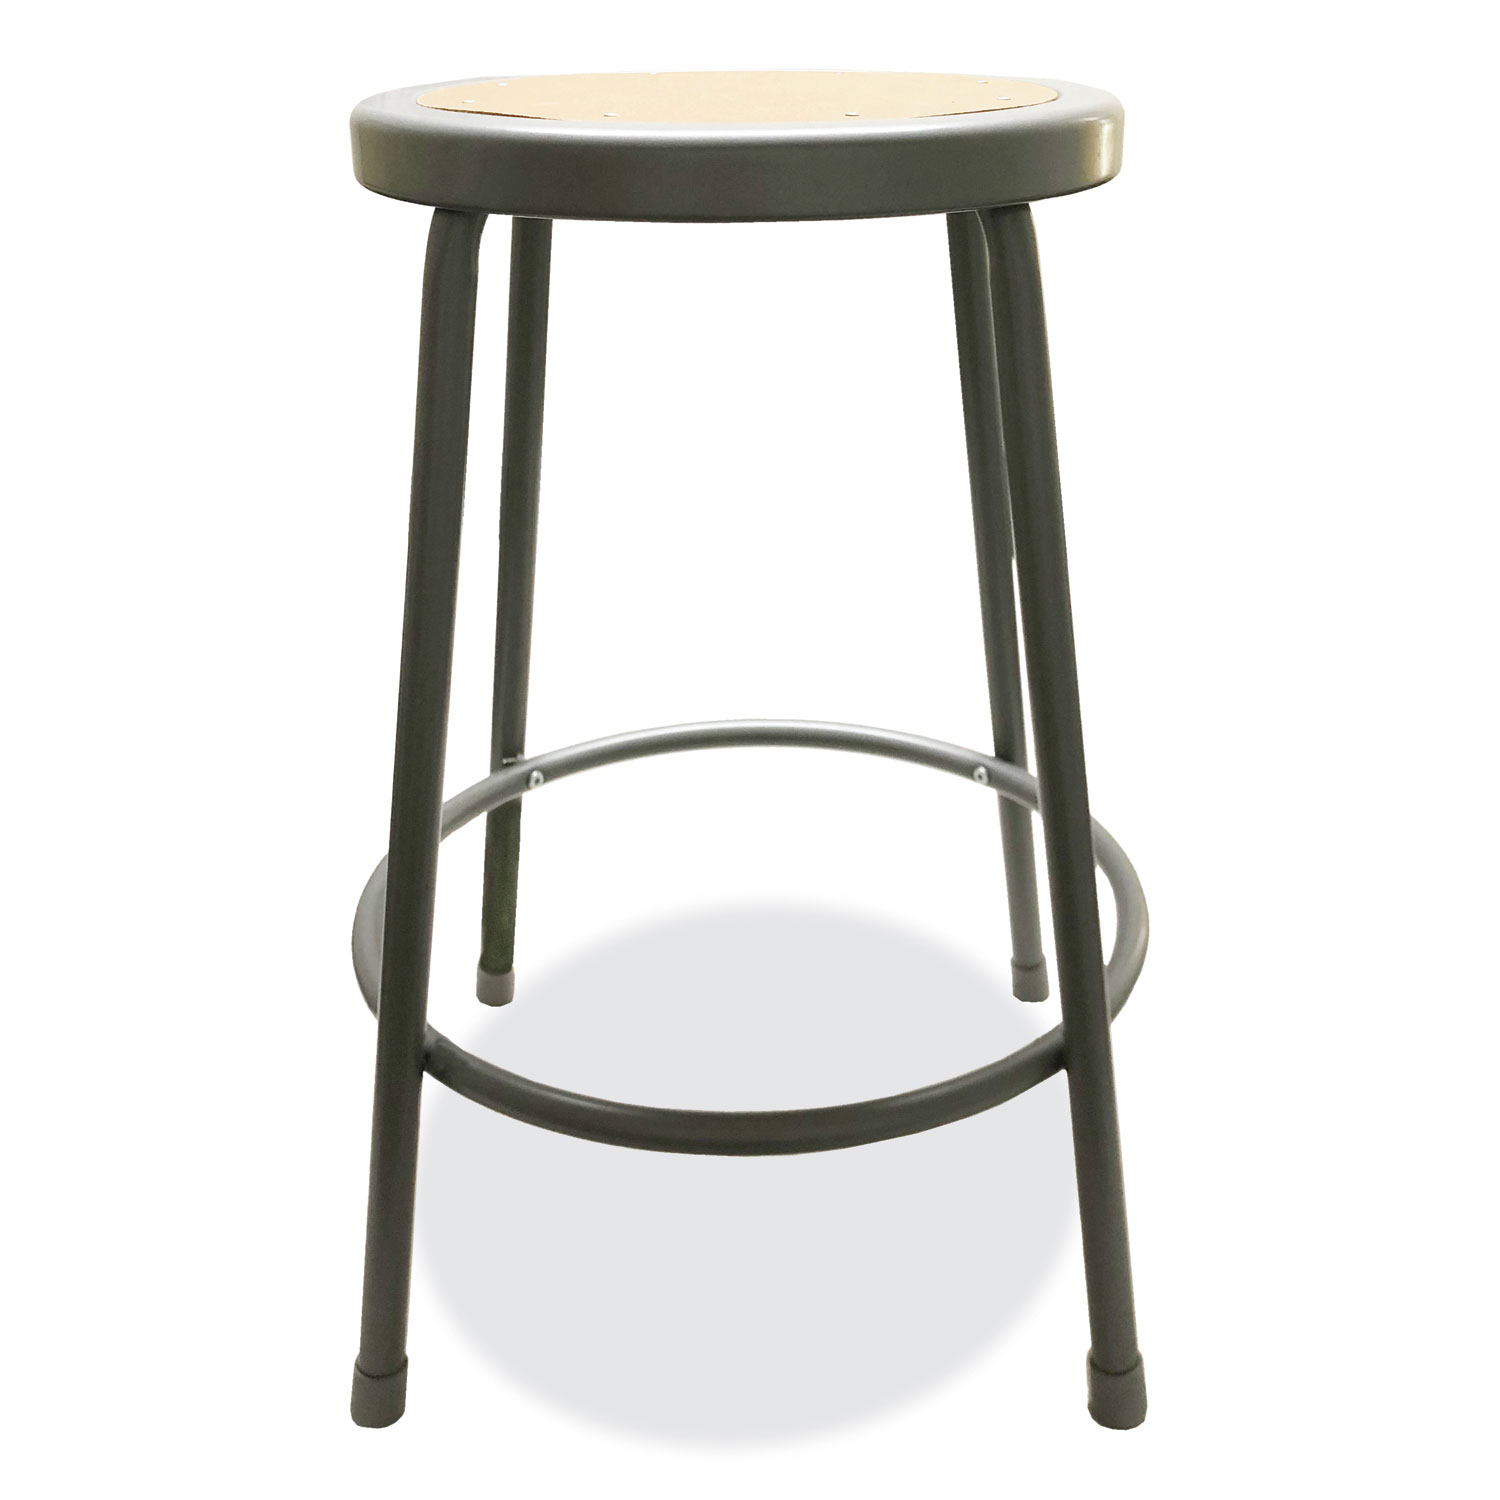 Industrial Metal Shop Stool, Backless, Supports Up to 300 lb, 24" Seat Height, Brown Seat, Gray Base